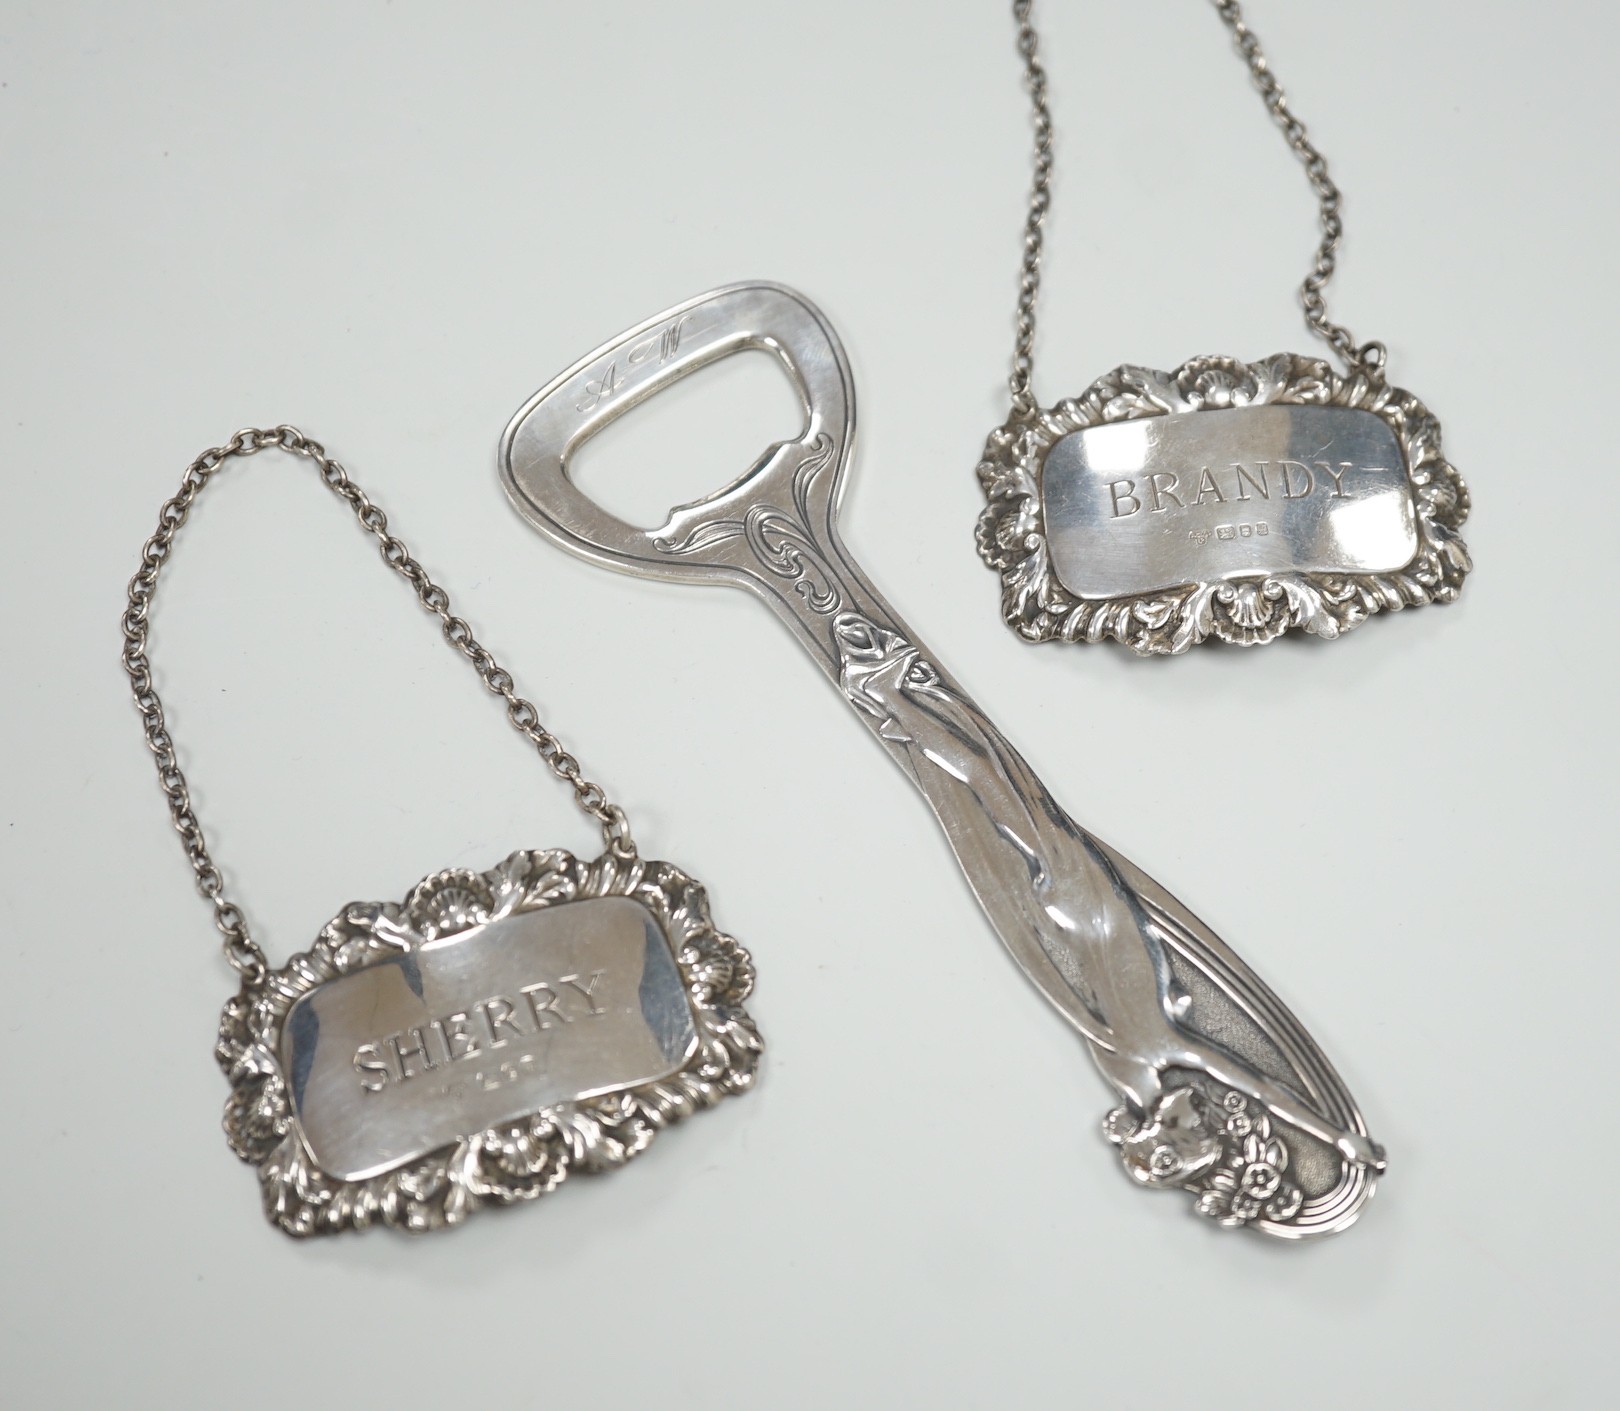 A pair of Queen Elizabeth II silver wine labels, 'Sherry & Brandy', A. Chick & Sons, Ltd, London, 1975 and an Art Nouveau style silver plated bottle opener.